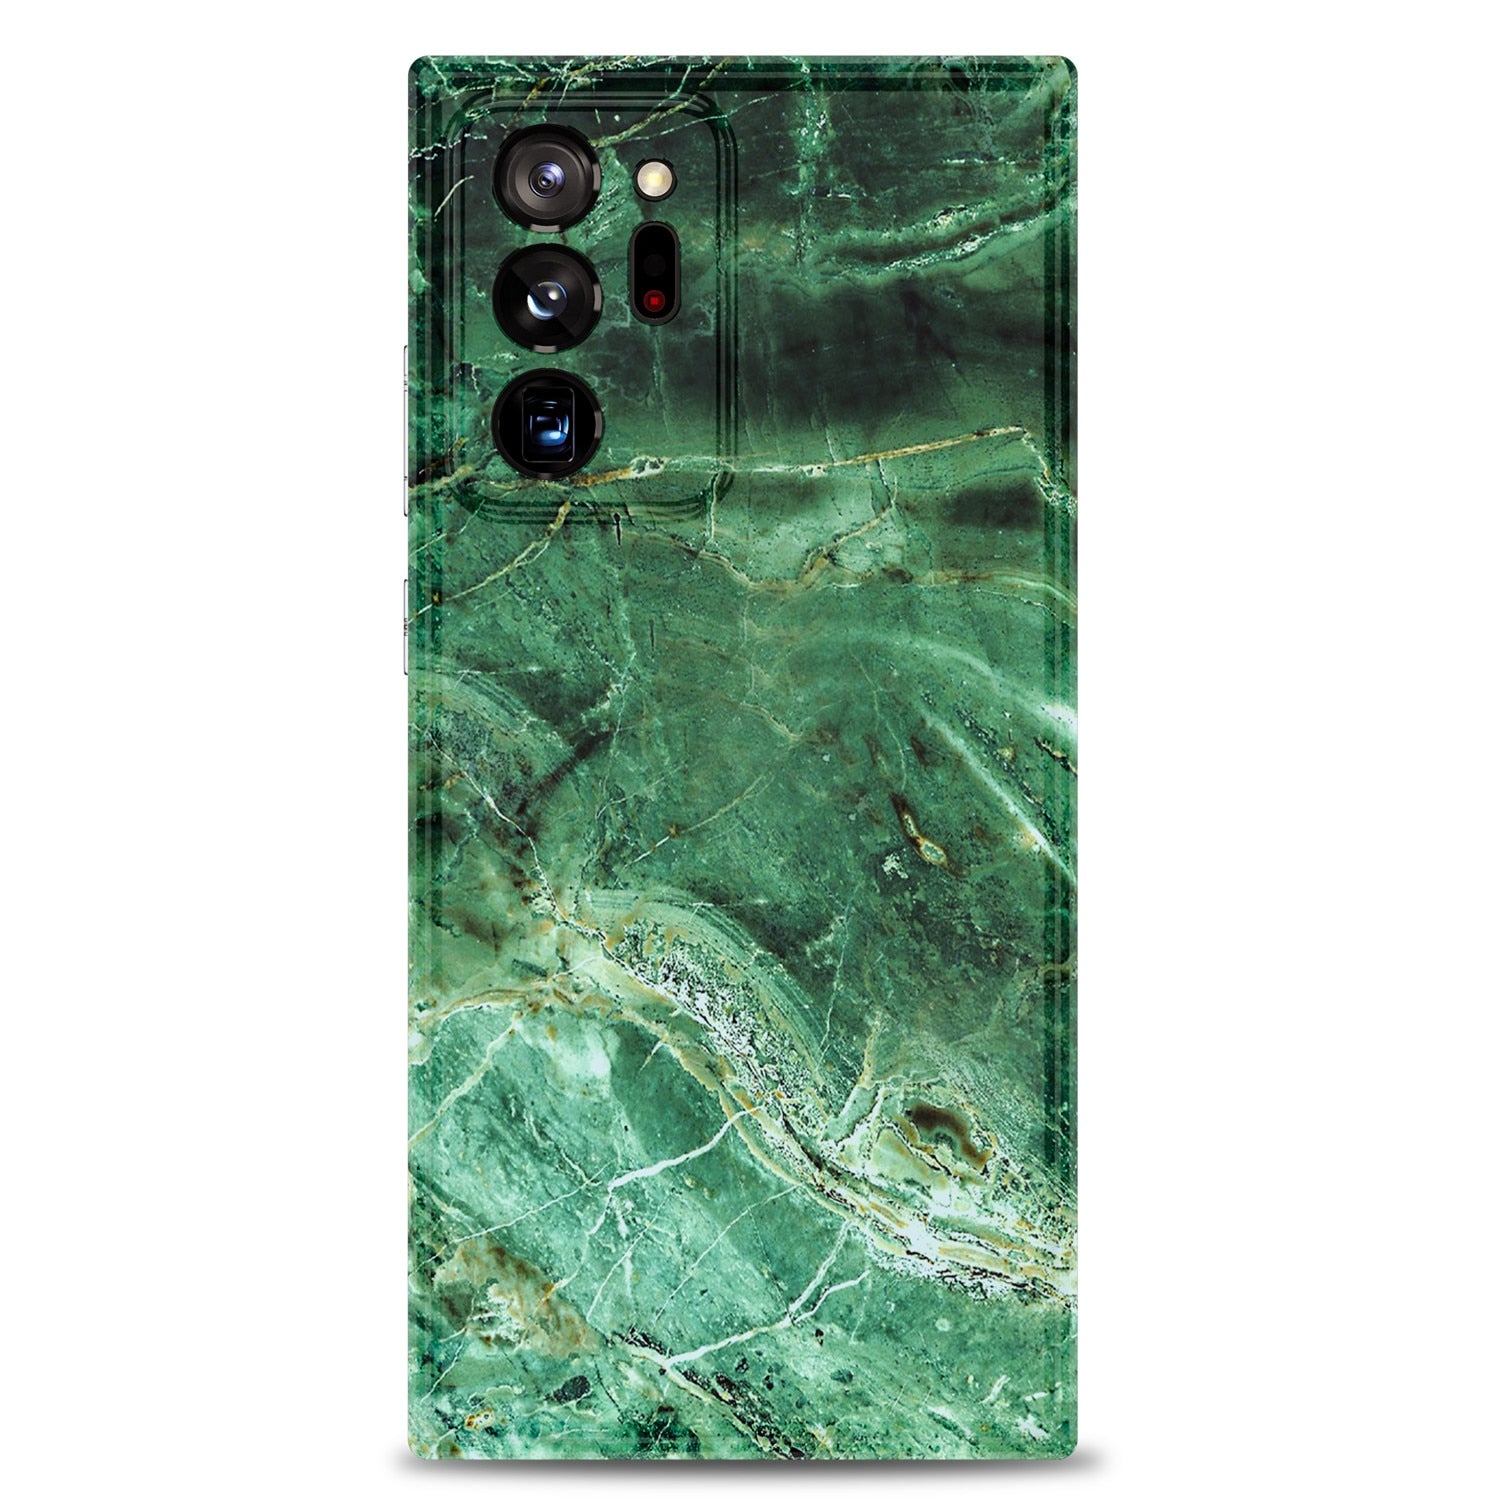 Case for Samsung Note 20 Ultra cover Marble Case, Slim Thin Glossy Soft TPU Rubber Gel Phone Case Cover for Note 20 Ultra case - 380230 for Note 20 / Green / United States Find Epic Store